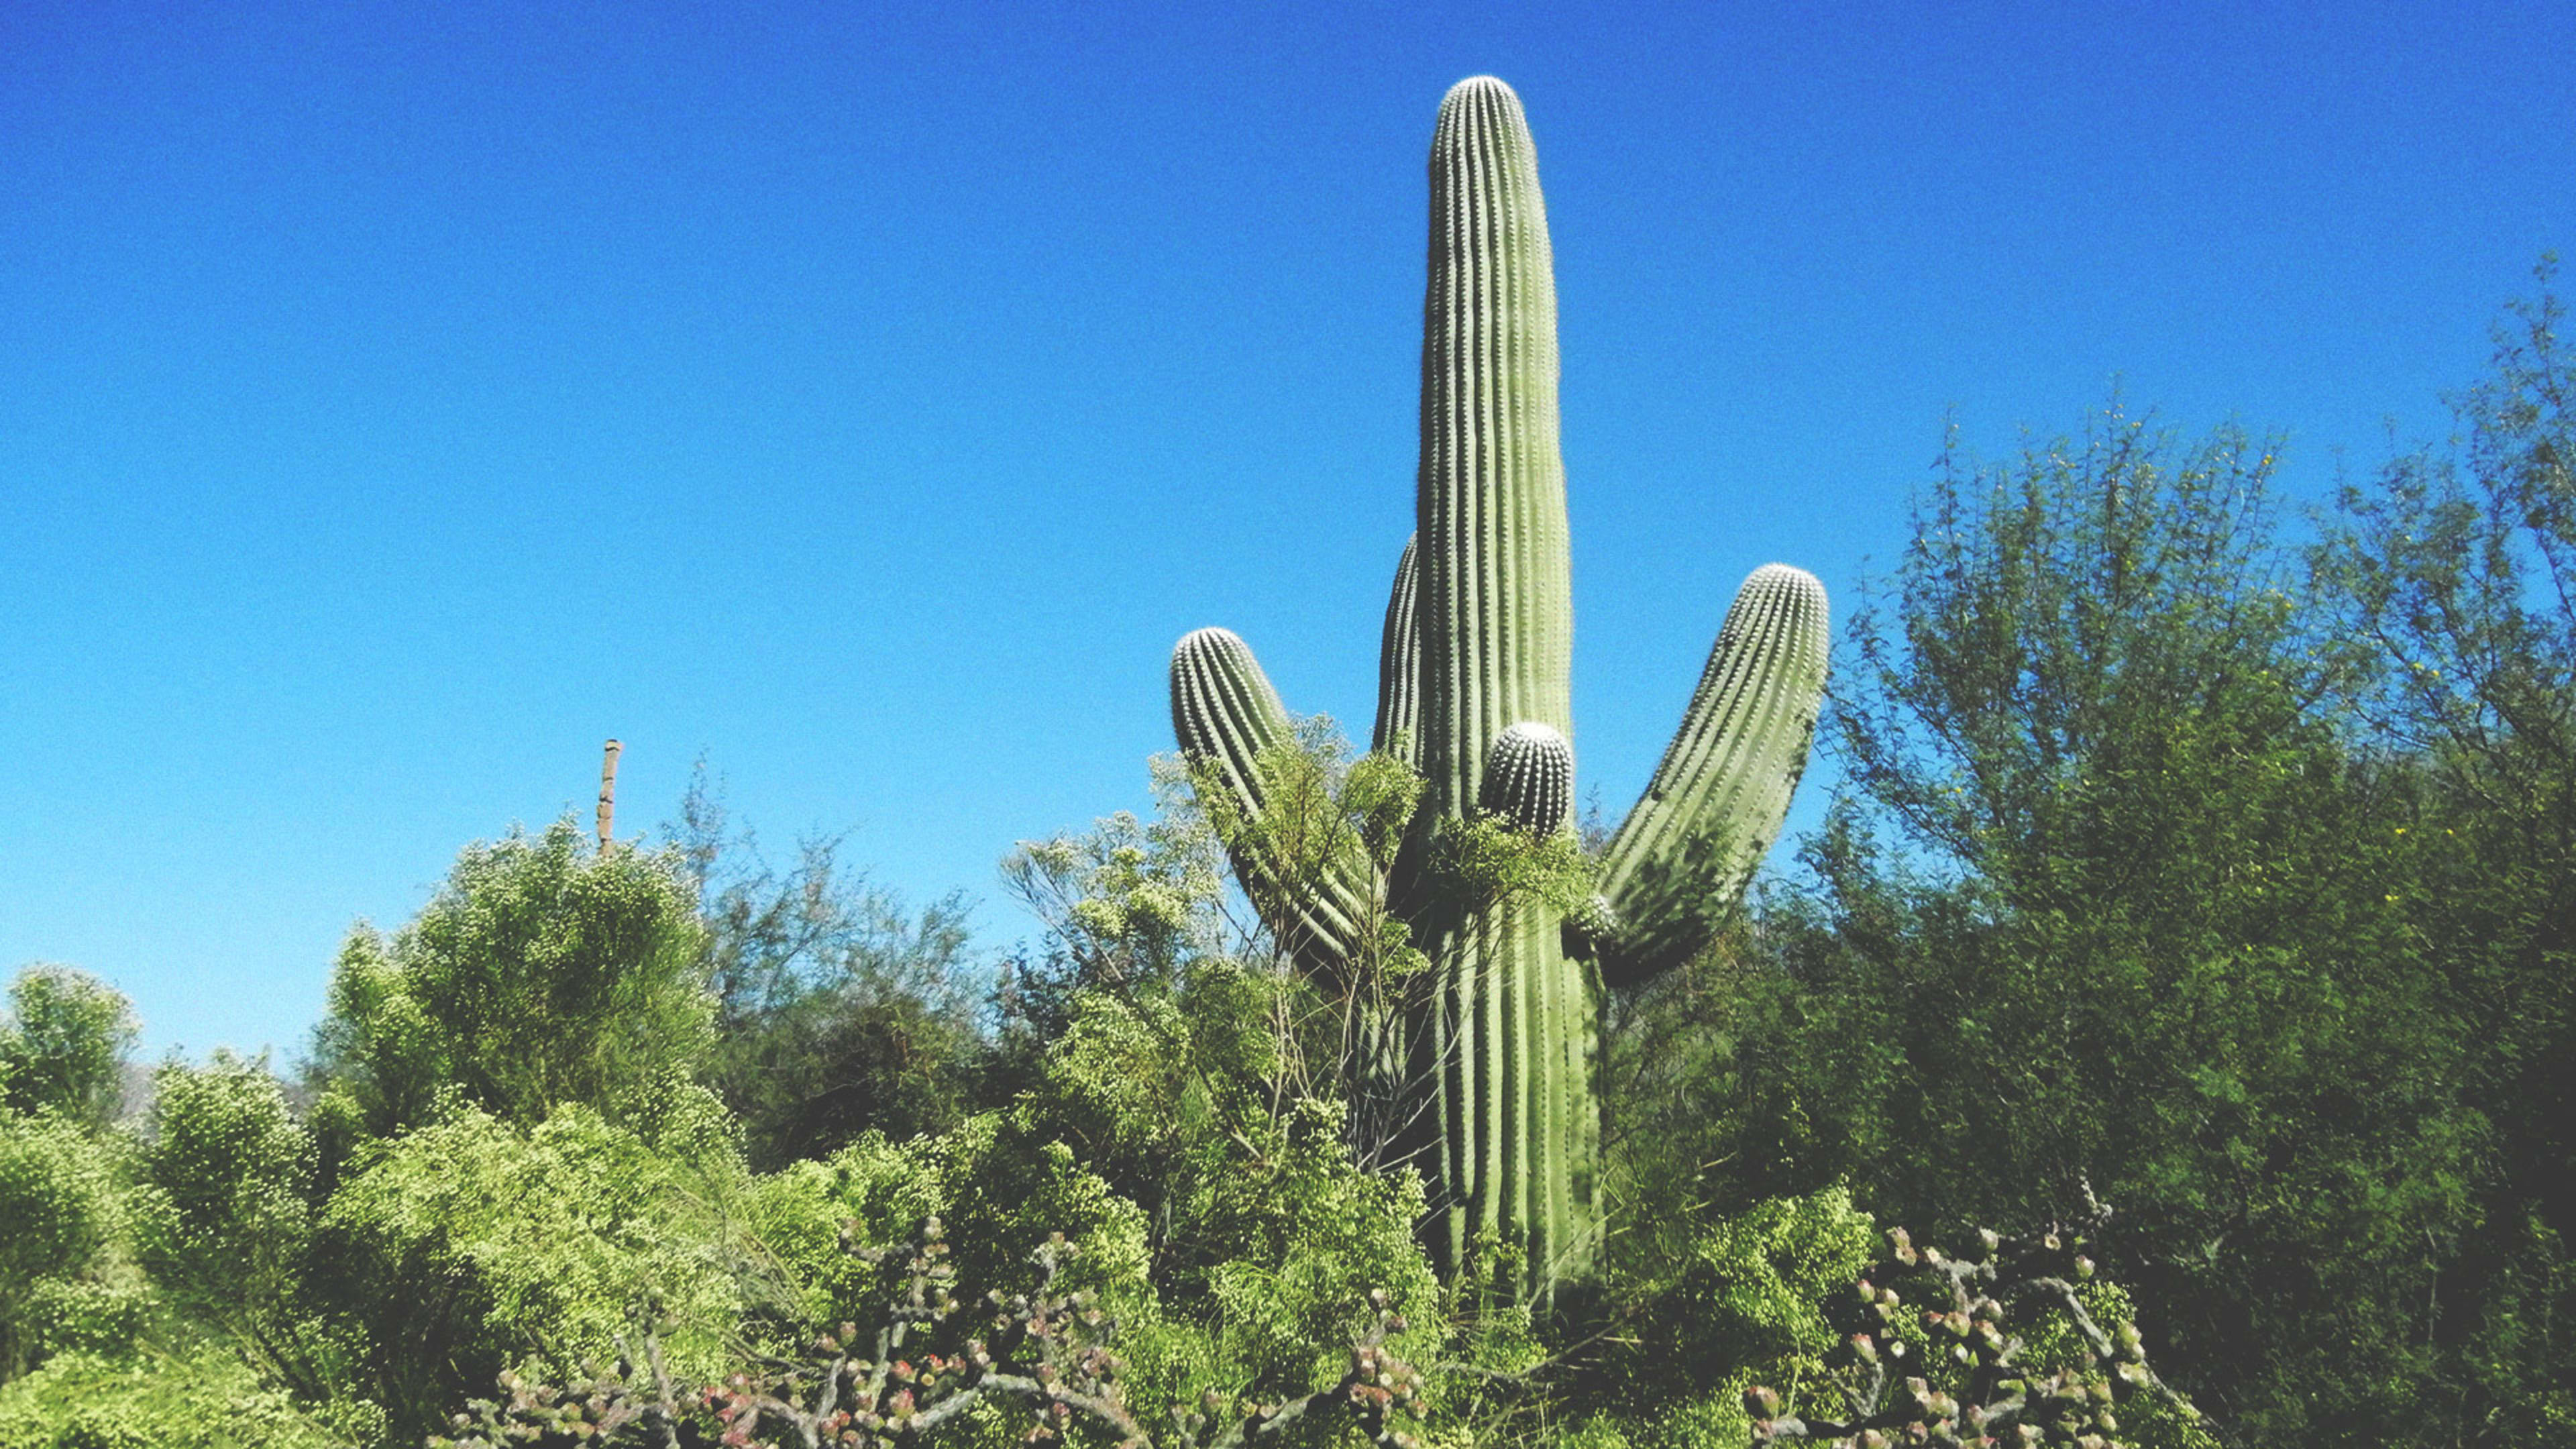 Amazon declines Tucson’s cactus, but other kinds of gifts are great